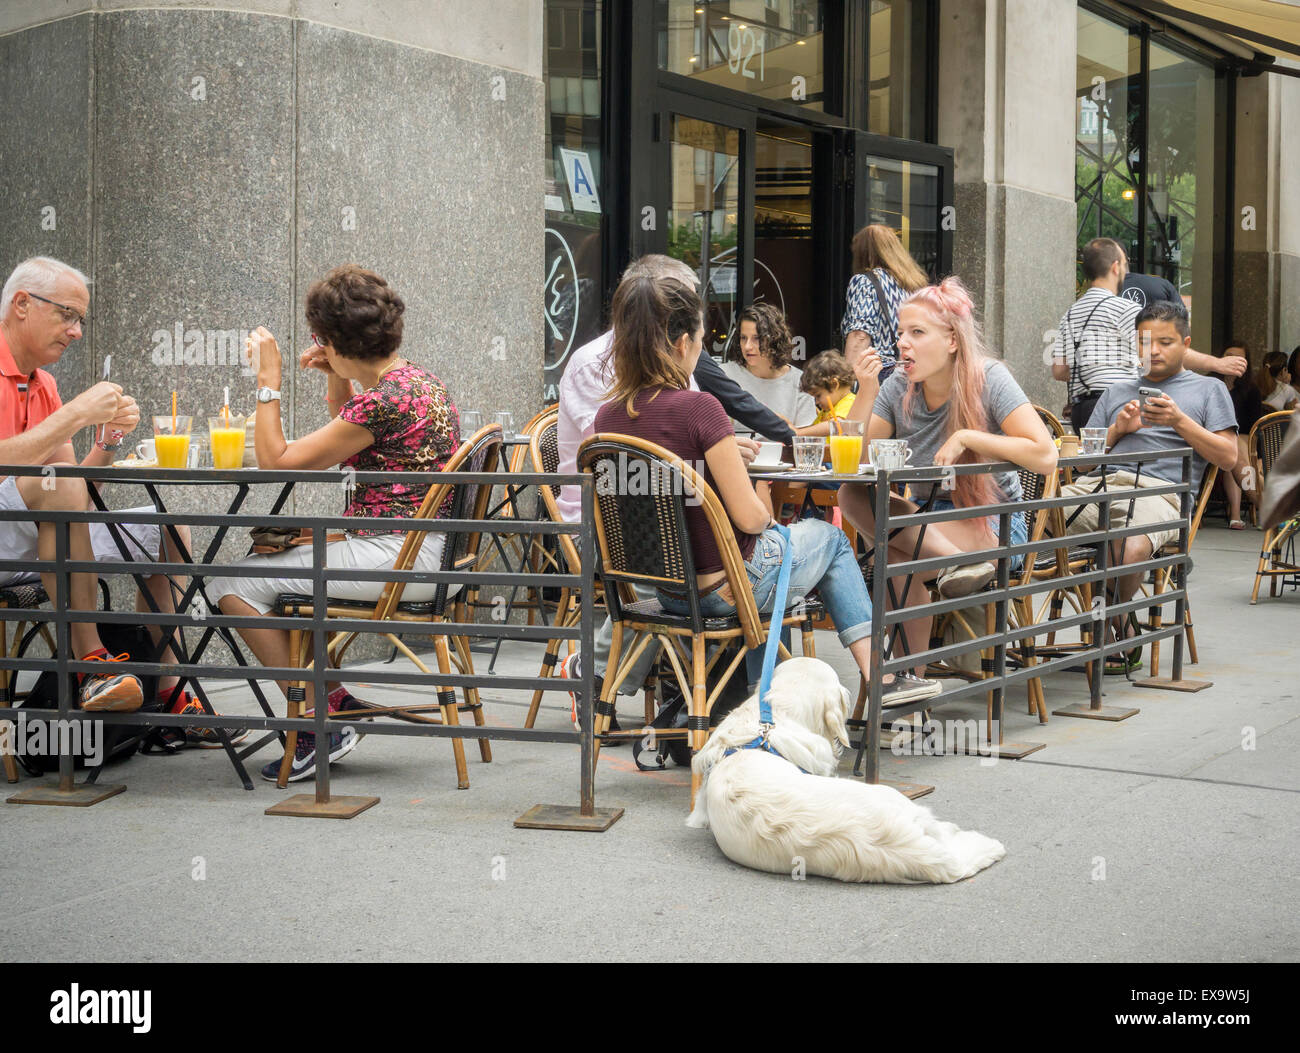 A dog patiently waits outside while its owner eats in an outdoor cafe in New York on Saturday, July 4, 2015. The NYS legislature has passed a bill allowing restaurants to permit dogs (with their owners) in the seating areas of outdoor cafes. The dogs must be on leashes and the restaurant has the final say whether or not it wishes to admit dogs. (© Richard B. Levine) Stock Photo